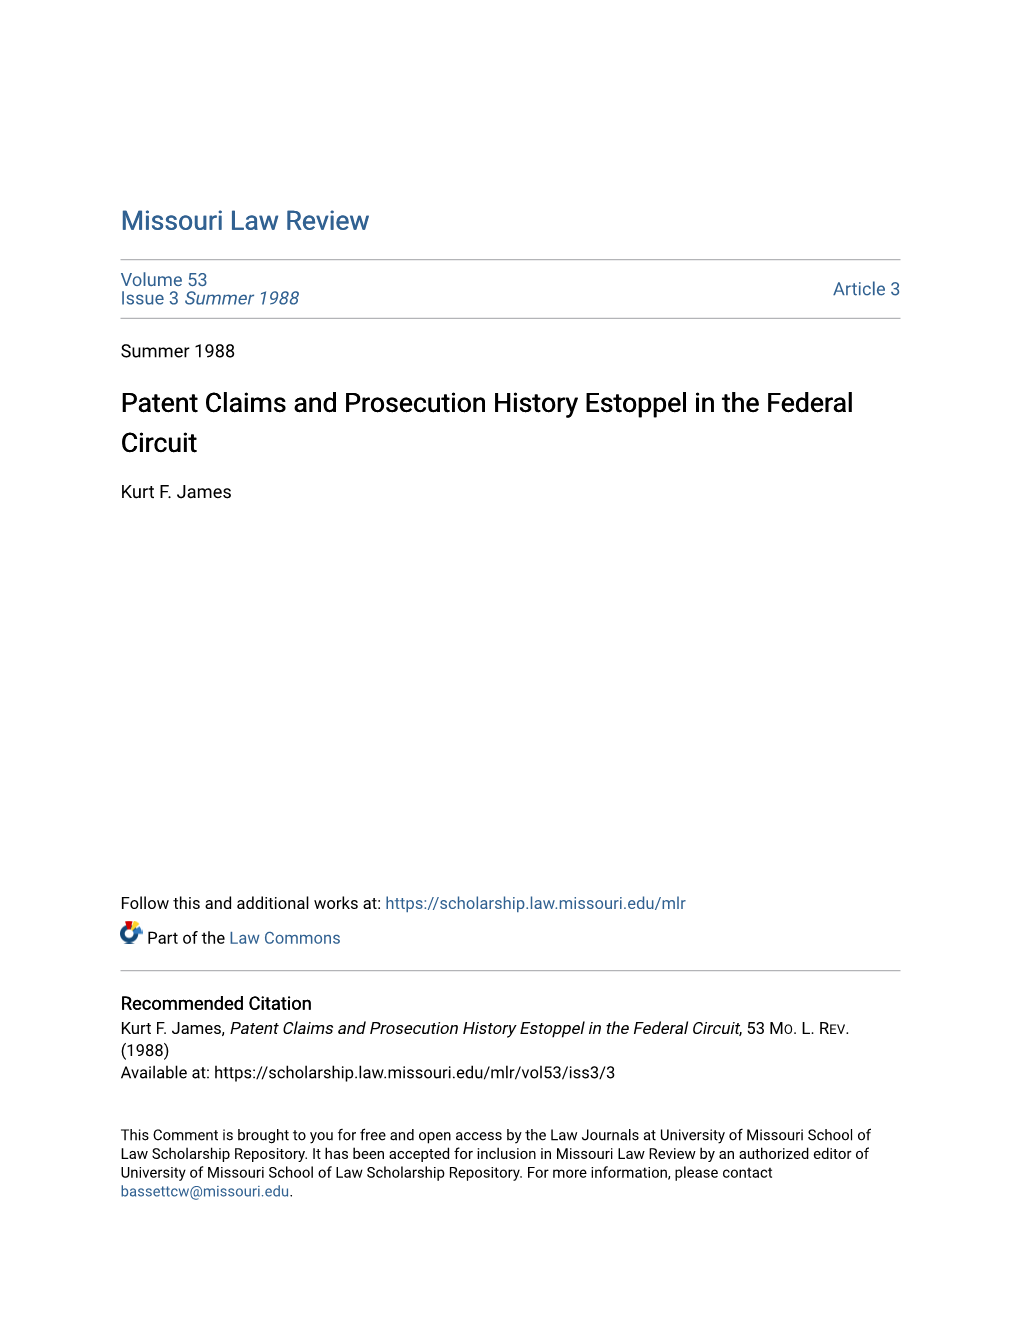 Patent Claims and Prosecution History Estoppel in the Federal Circuit